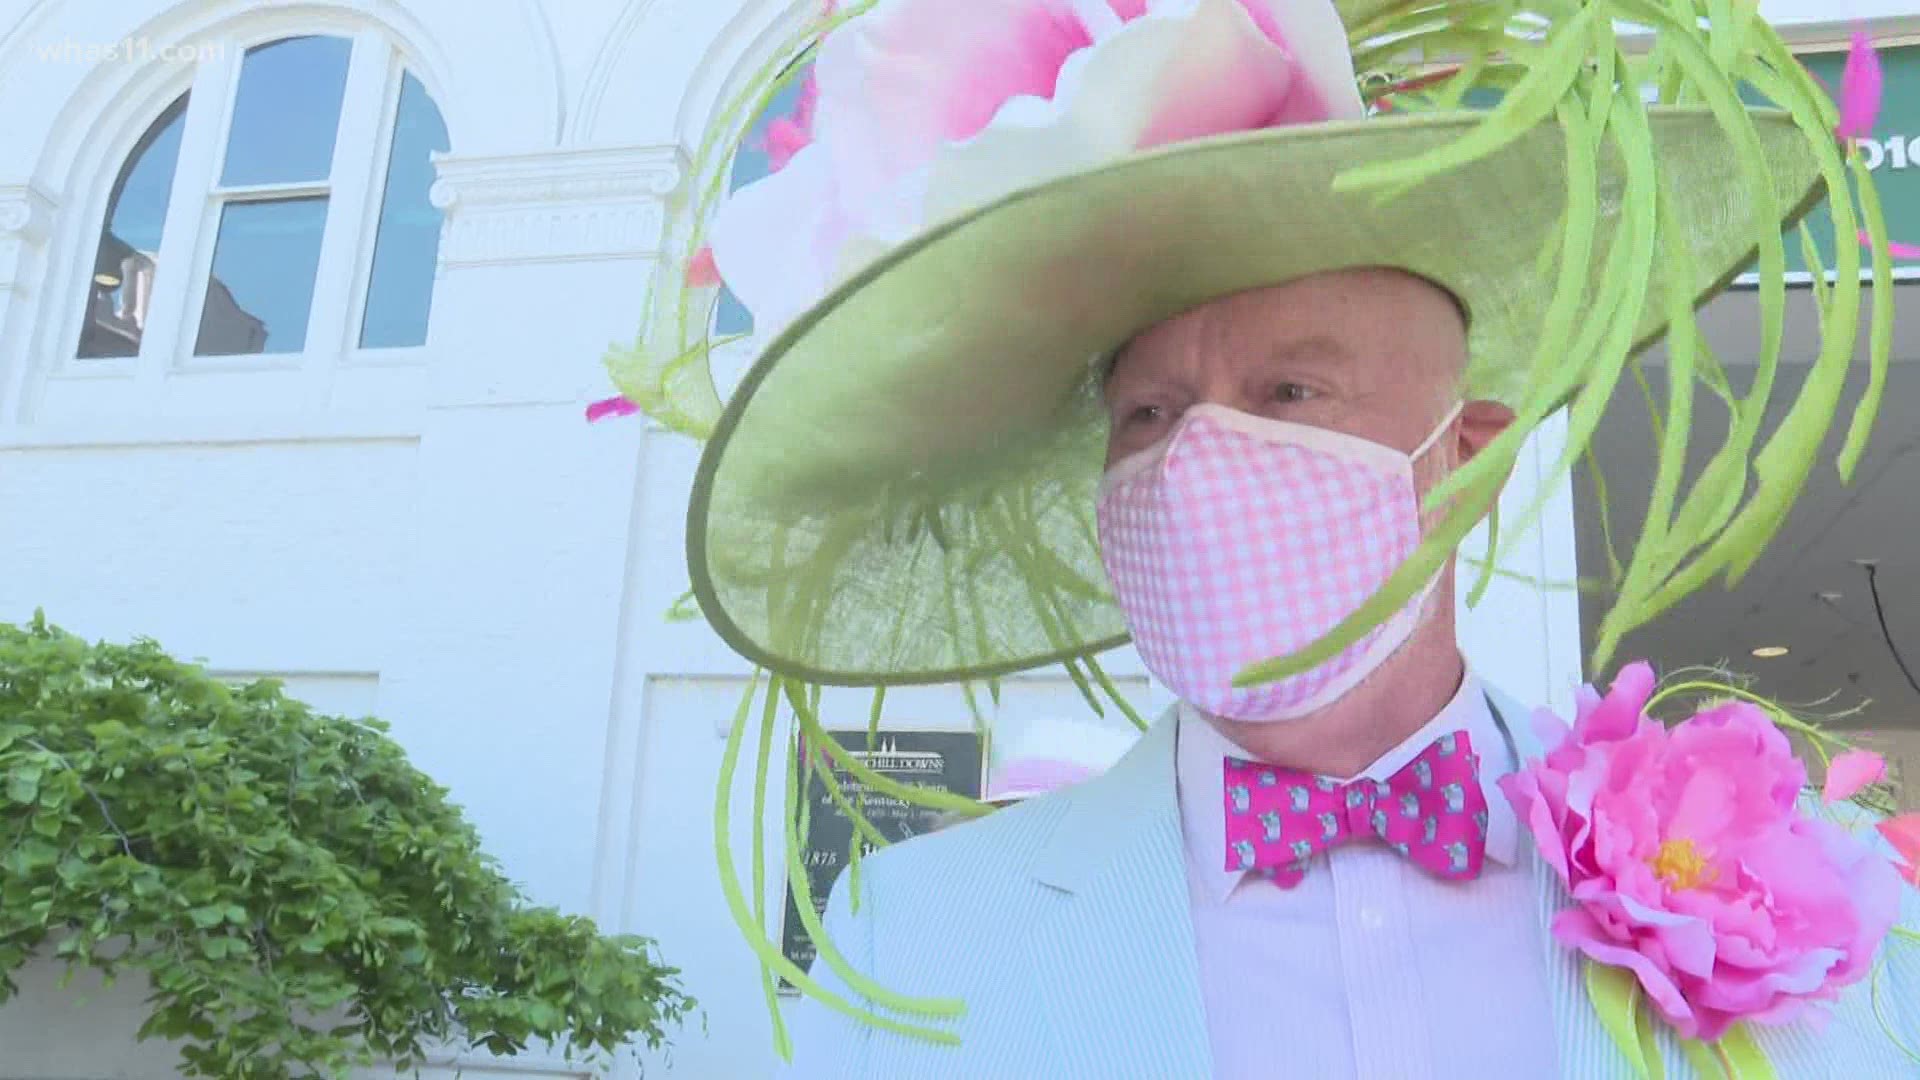 Fillies might be racing on the track for Oaks Day but Derby fashion is all the mood at Churchill Downs.